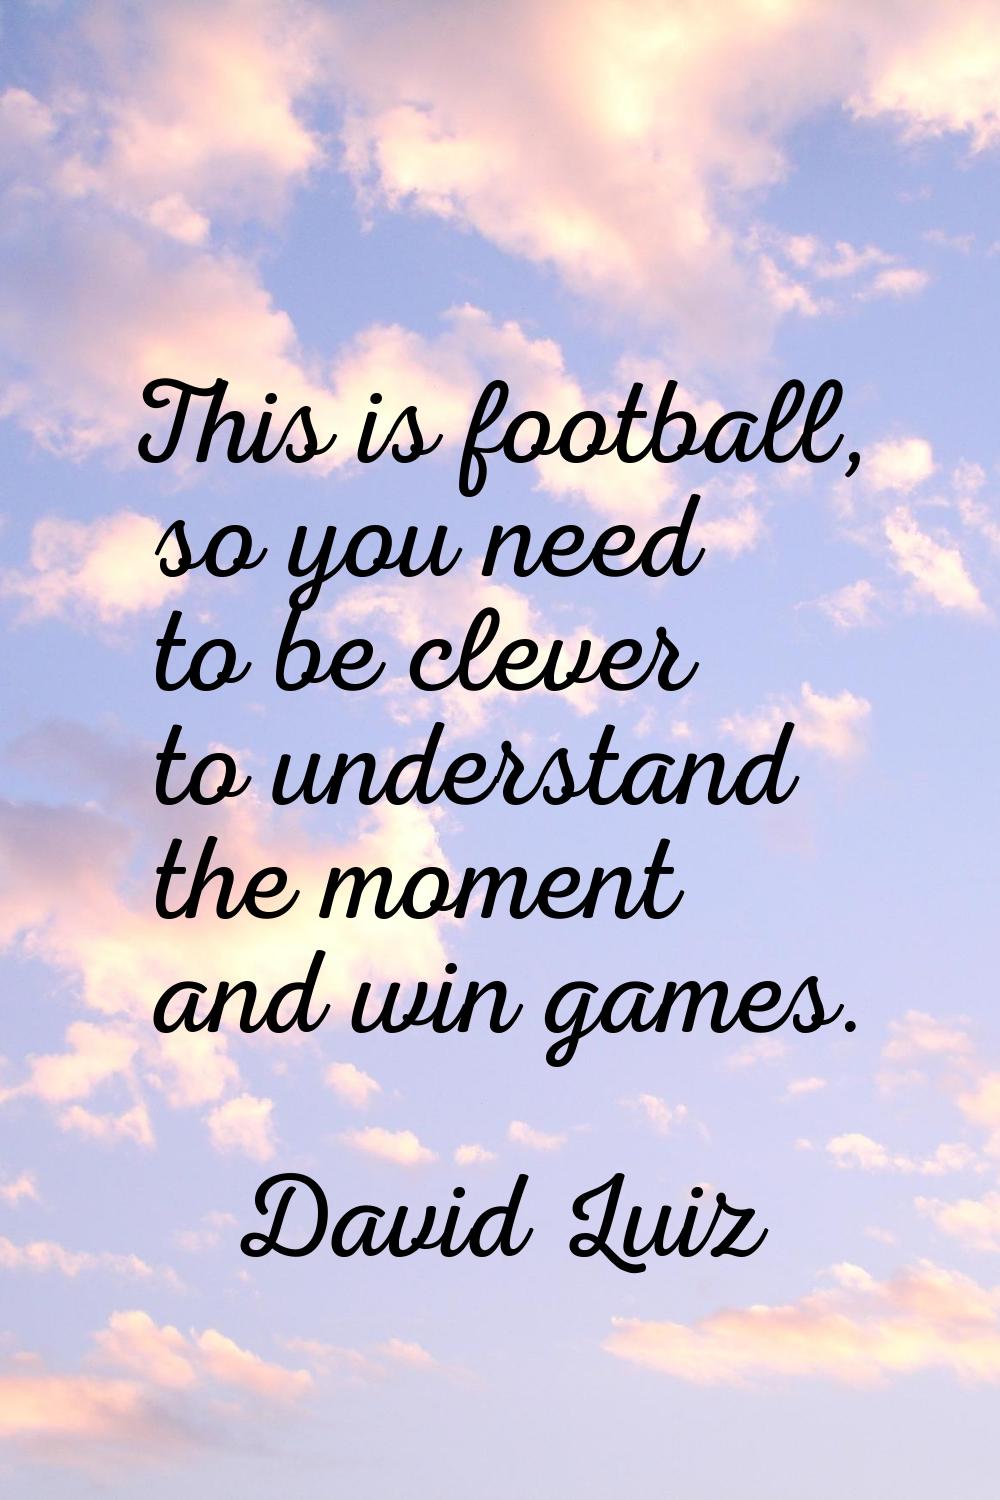 This is football, so you need to be clever to understand the moment and win games.